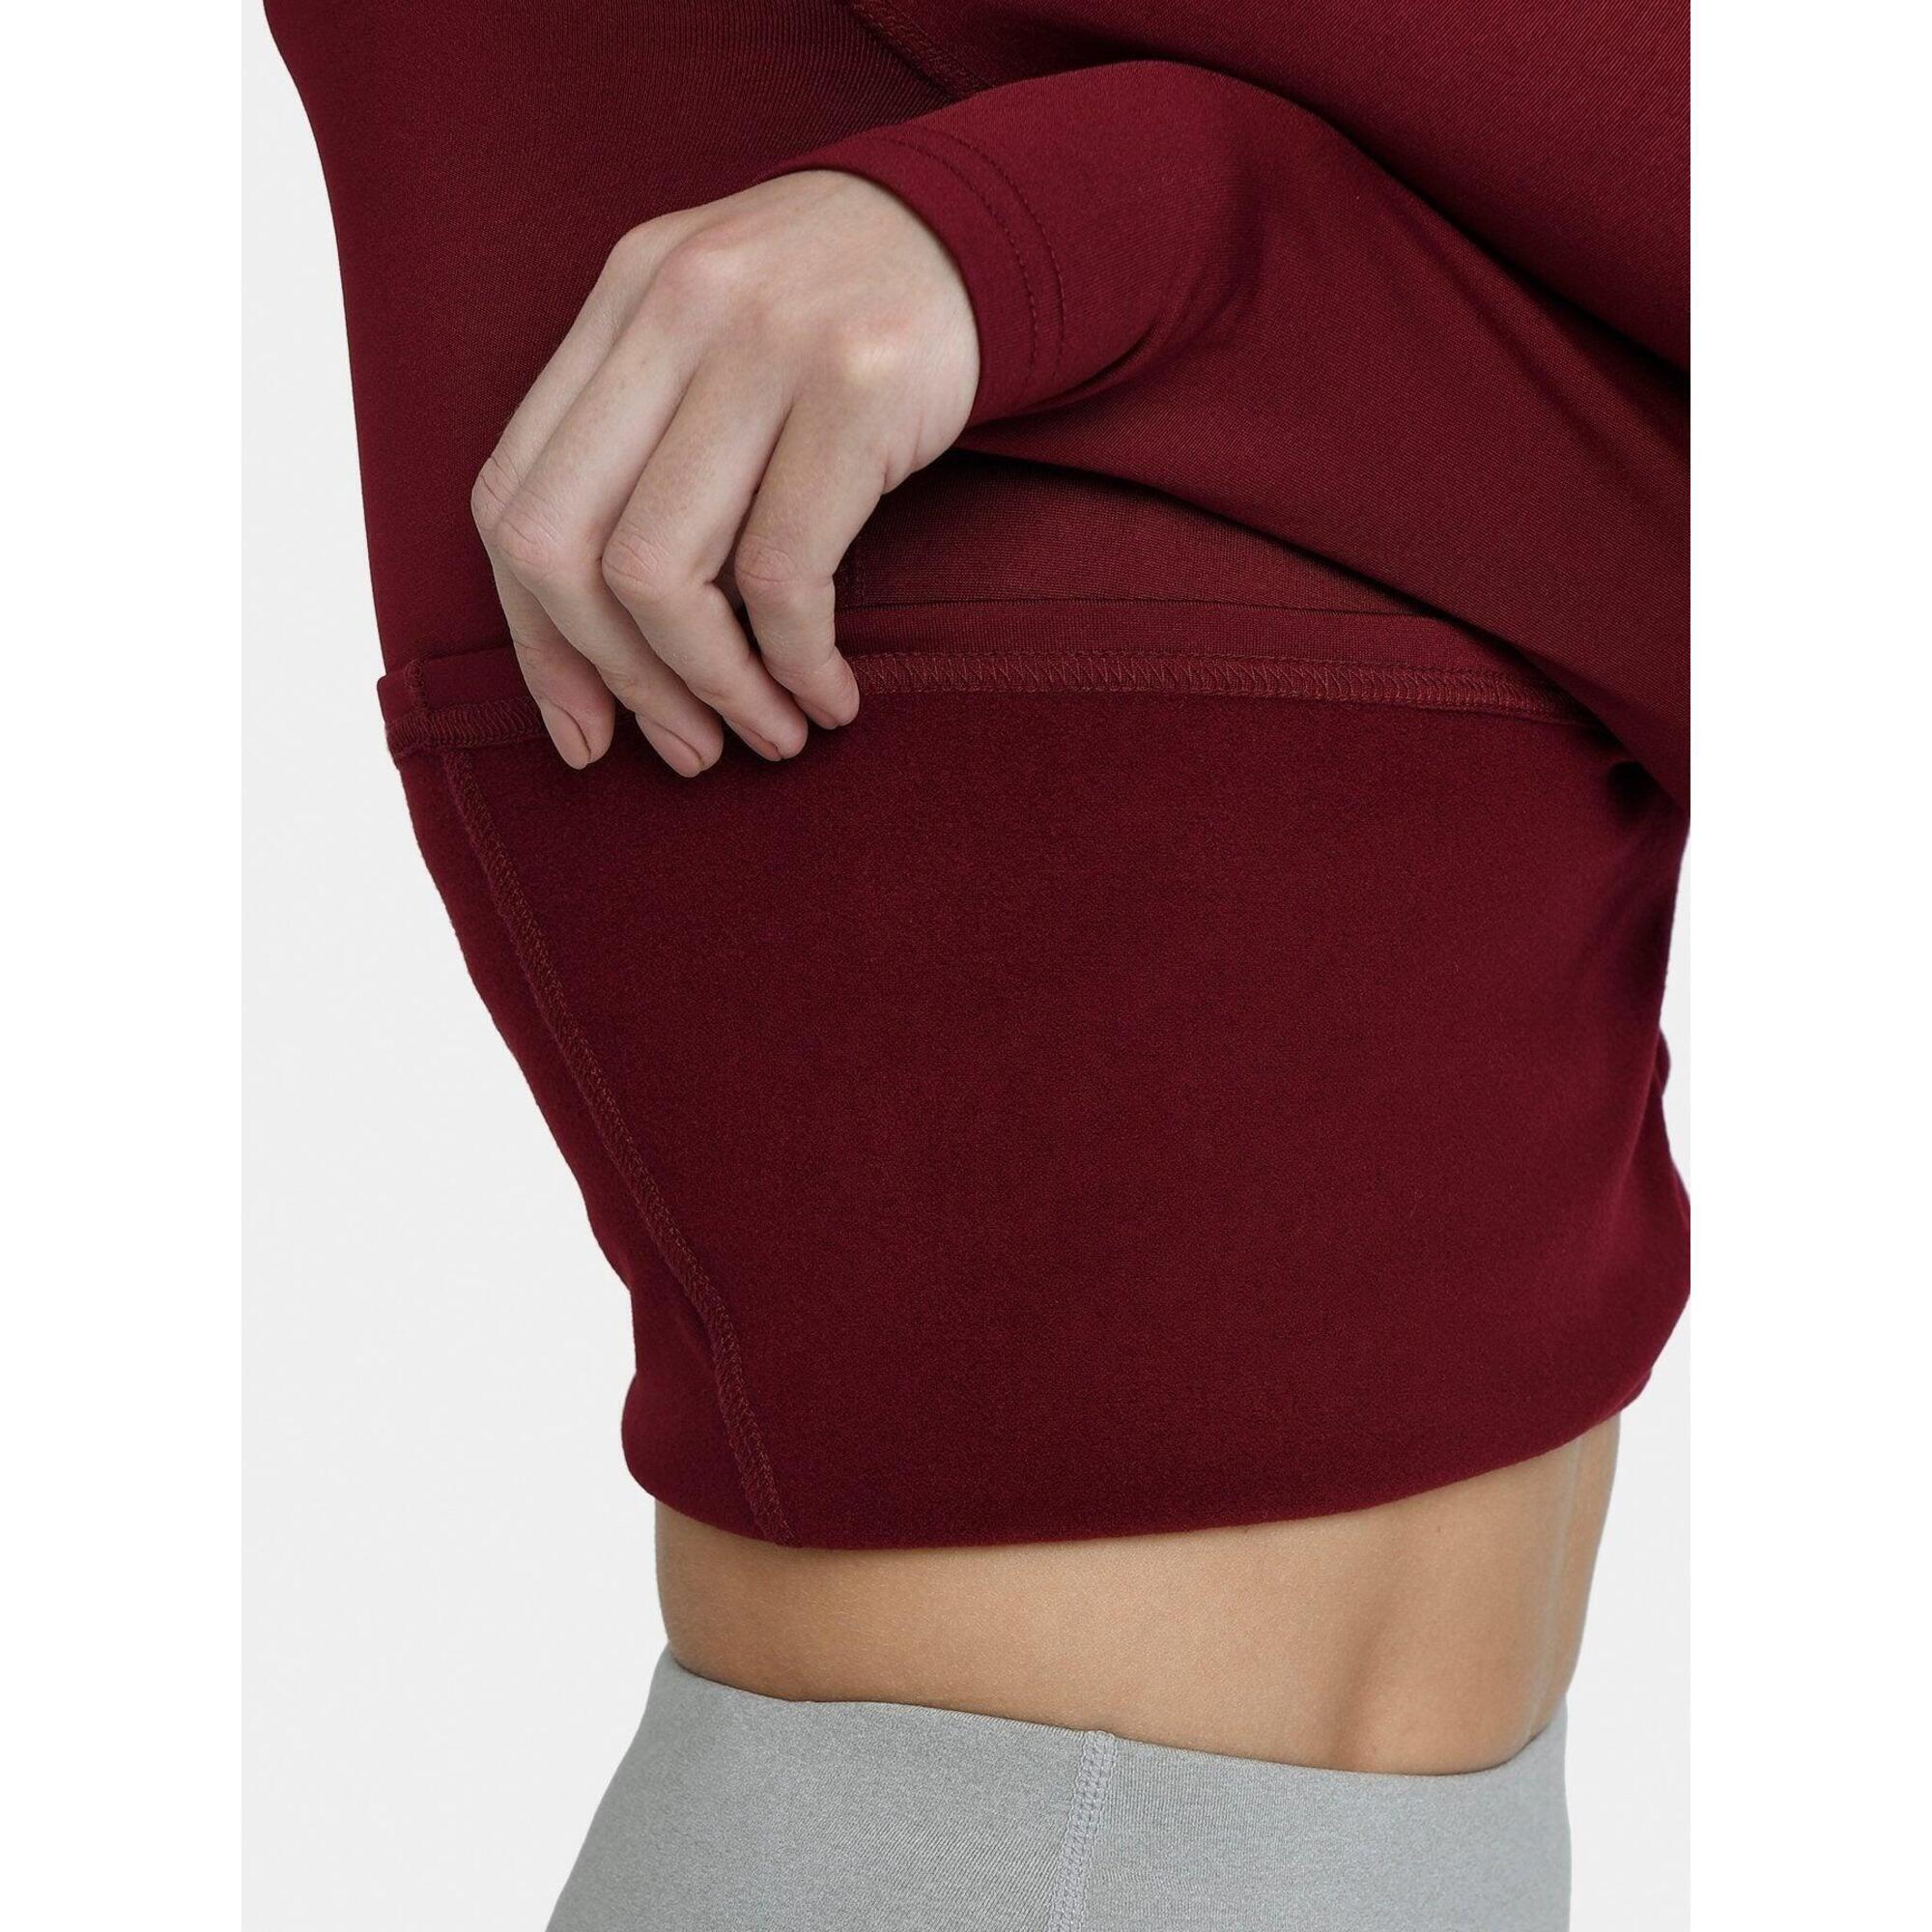 Women's Thermal Funnel Neck Top - Cabernet 5/5